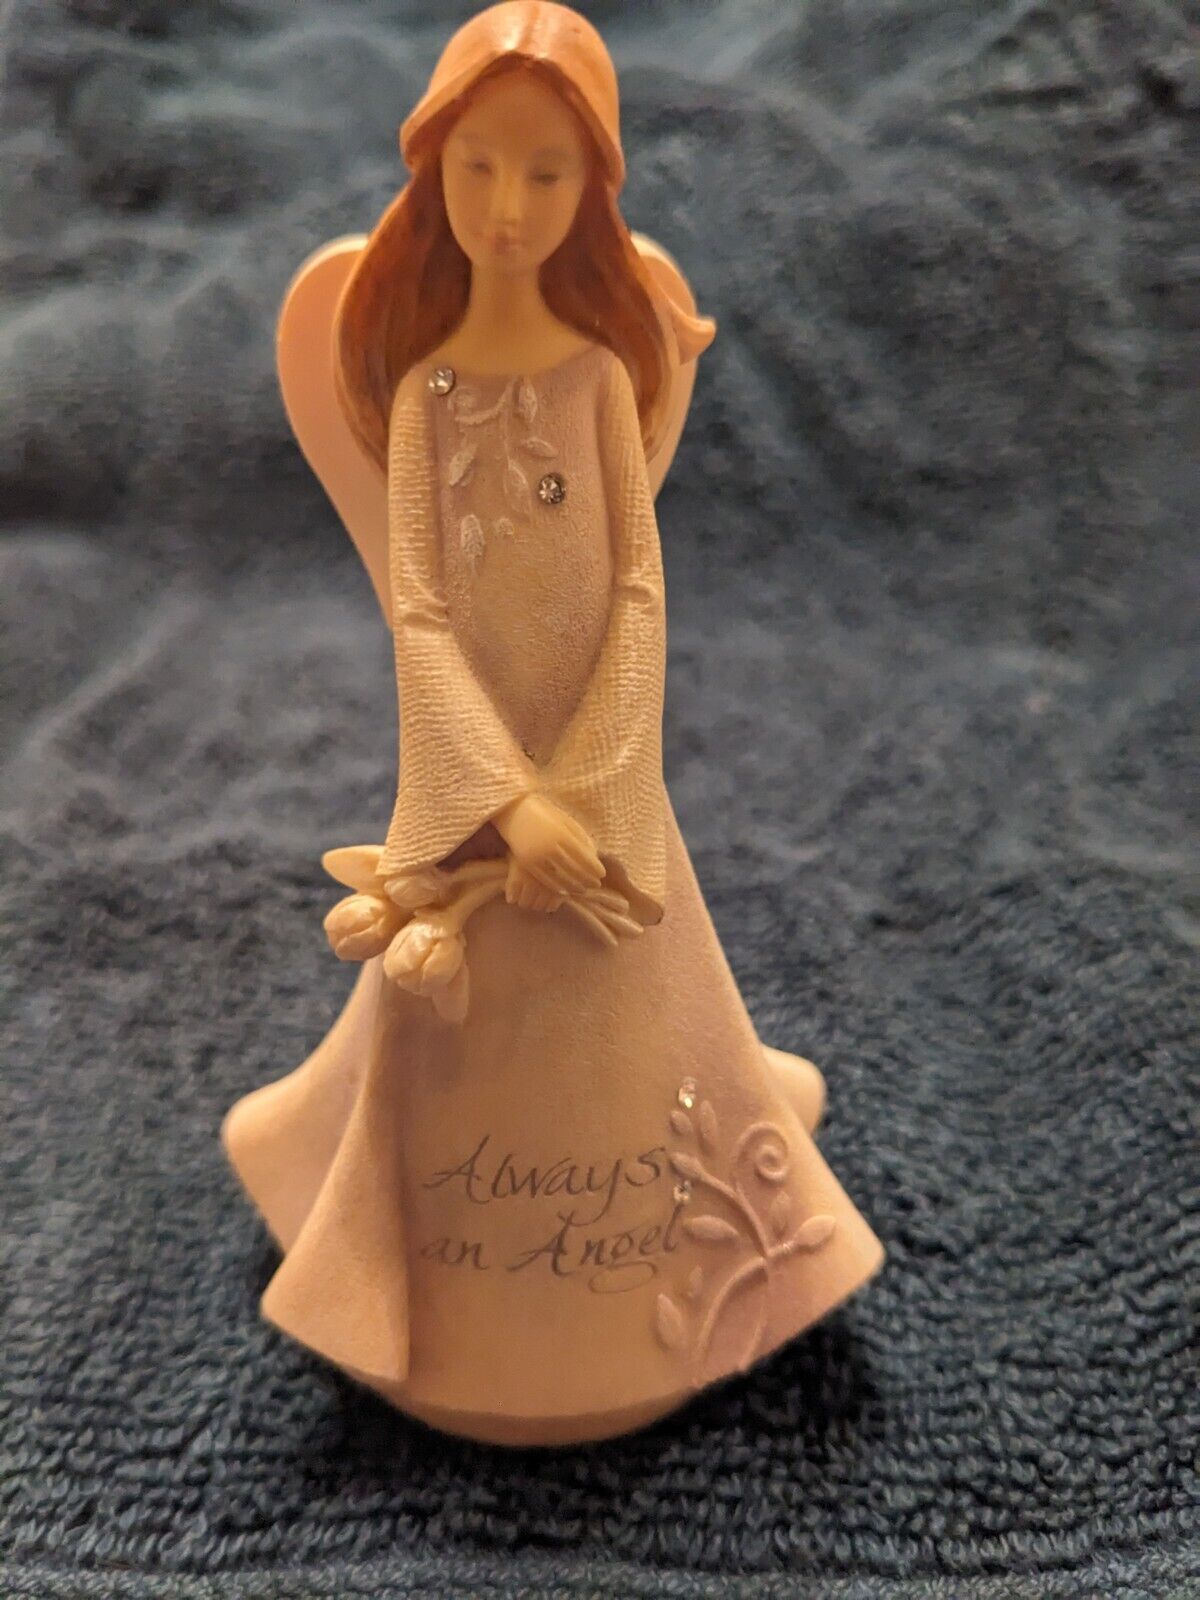 Foundations by Enesco Angel Figurine with Flowers Bouquet #4025647 by Karen Hahn